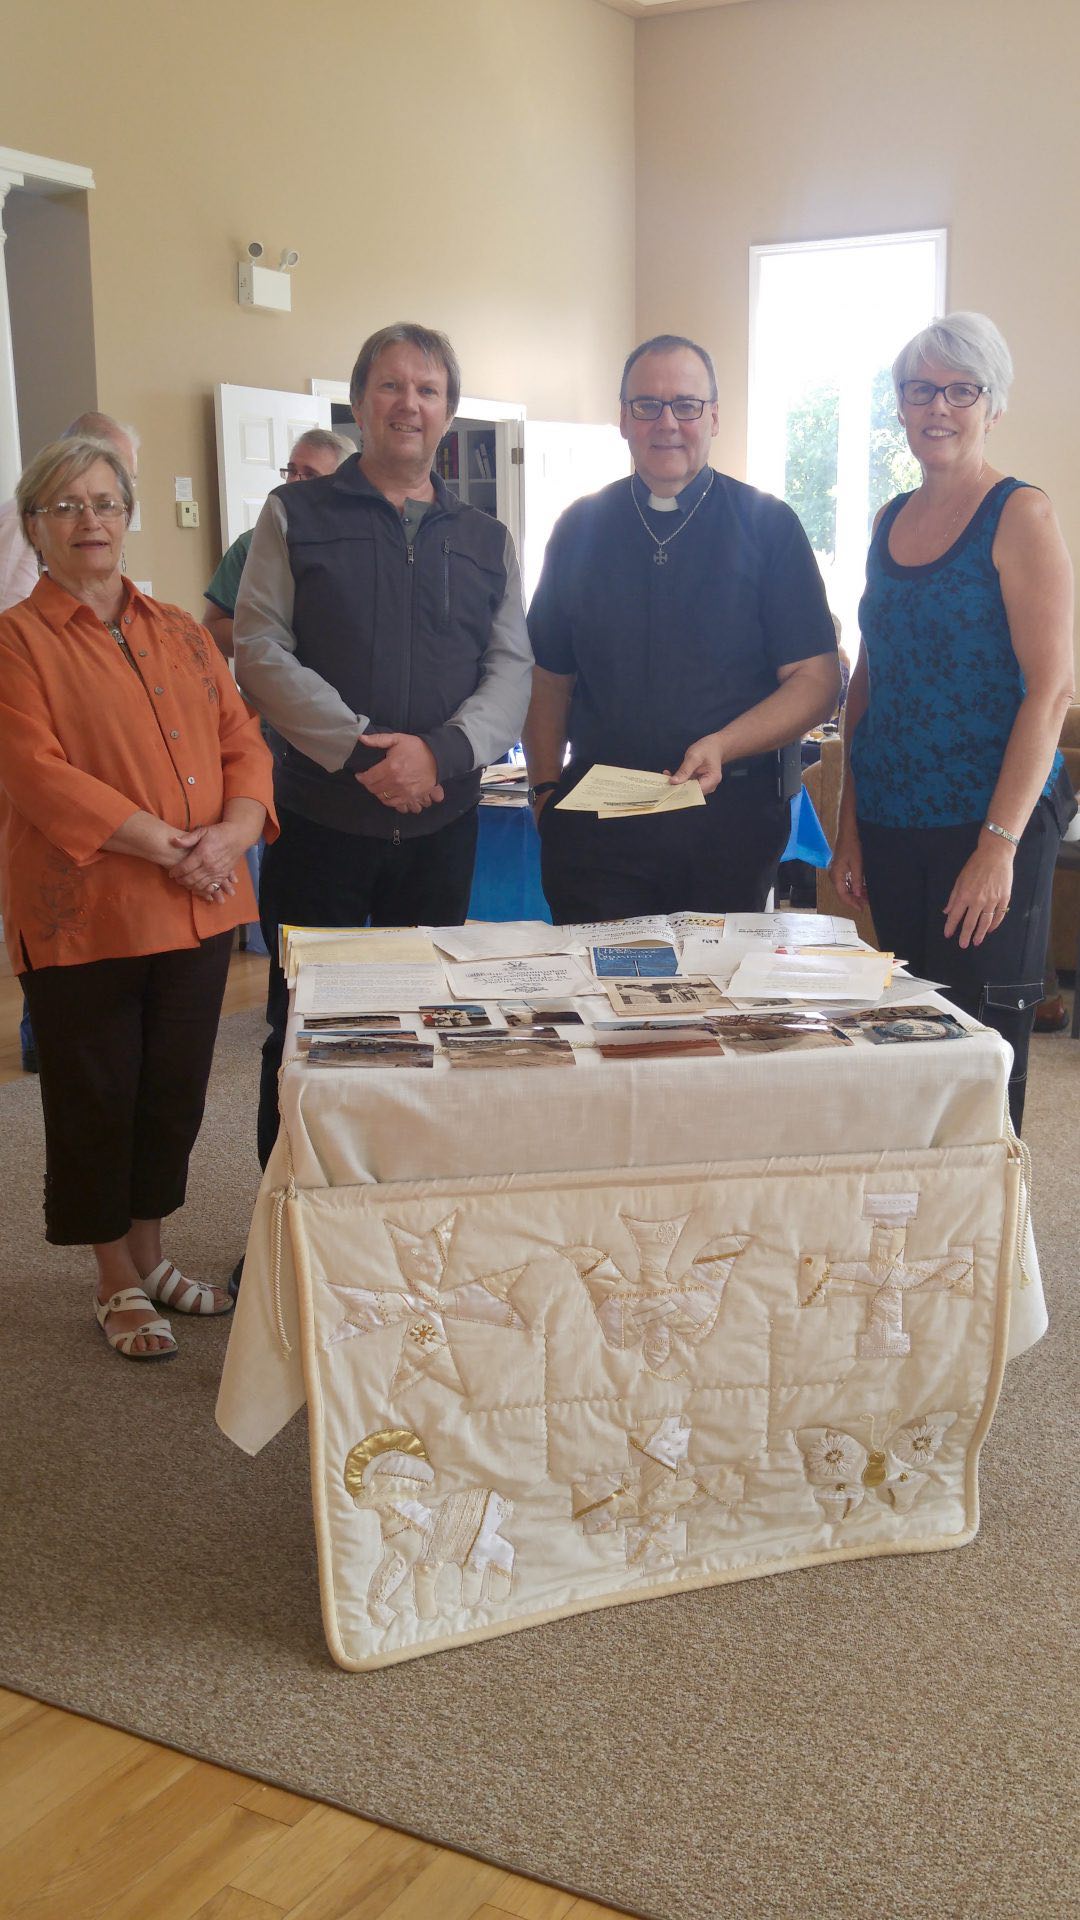 Churchwarden Reta Craig, Pastor Owen Ash, Canon Terry DeForest and Churchwarden Laurie Douglas were on hand to see what the pioneers of the past had sealed away in a capsule for the pioneers of today. Photo: Submitted by Laurie Douglas